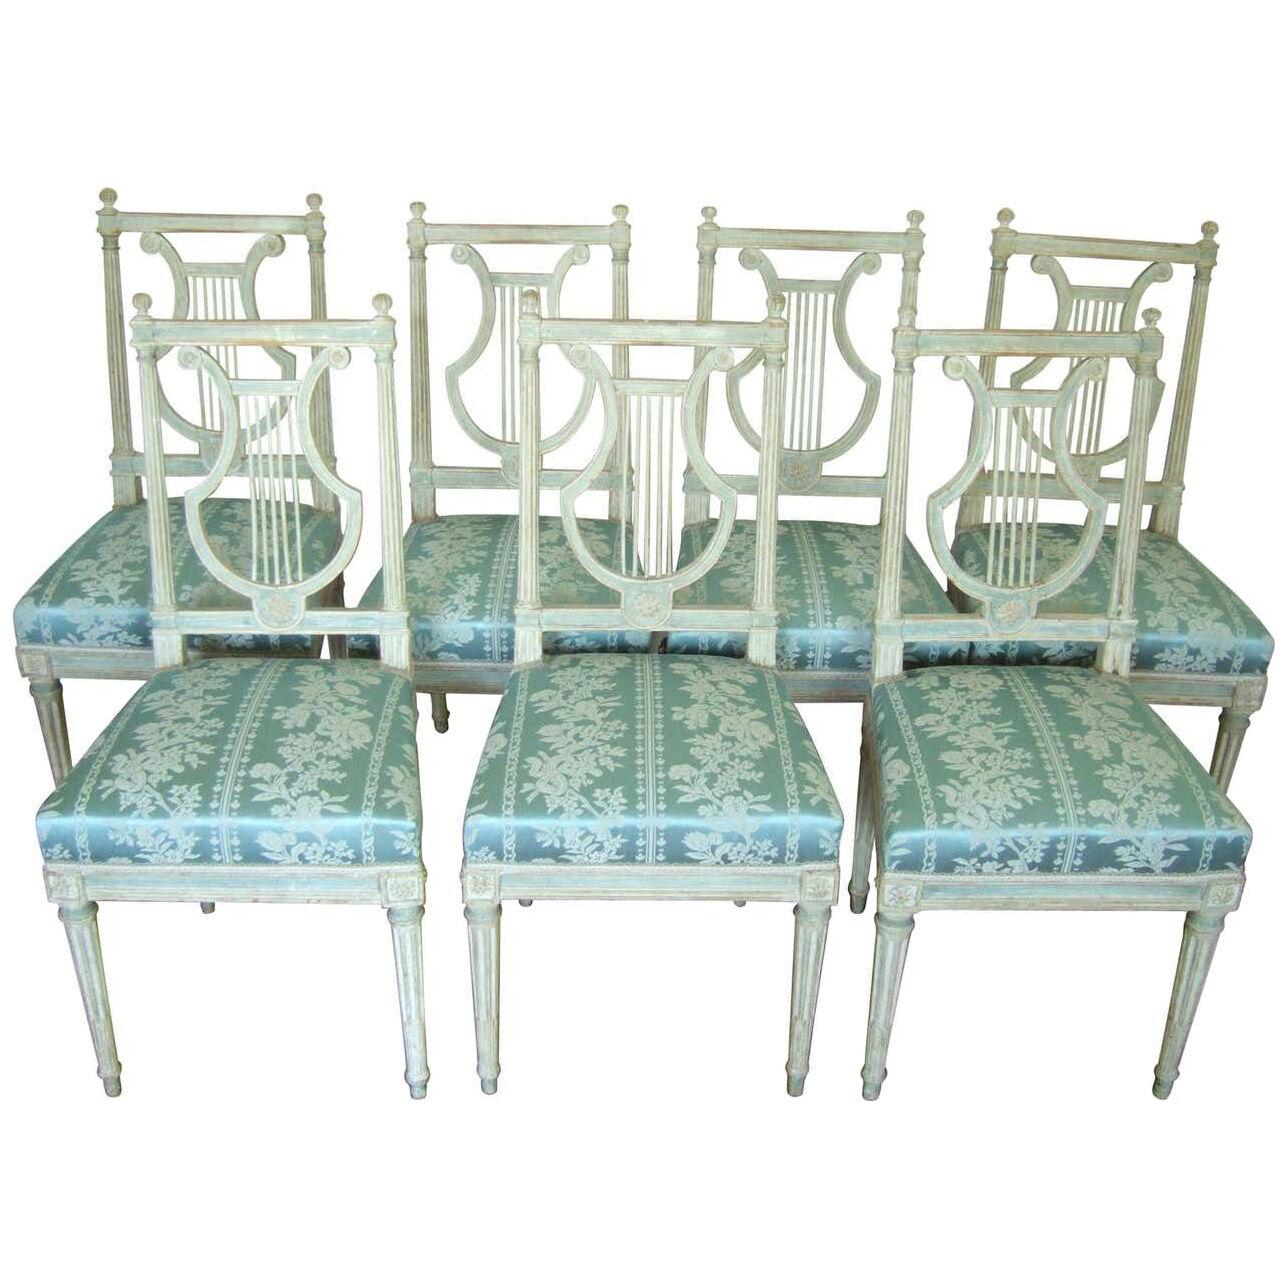 Set of Original Jacob Model Chairs Lyre of Louis XVI, Late 18th Century France